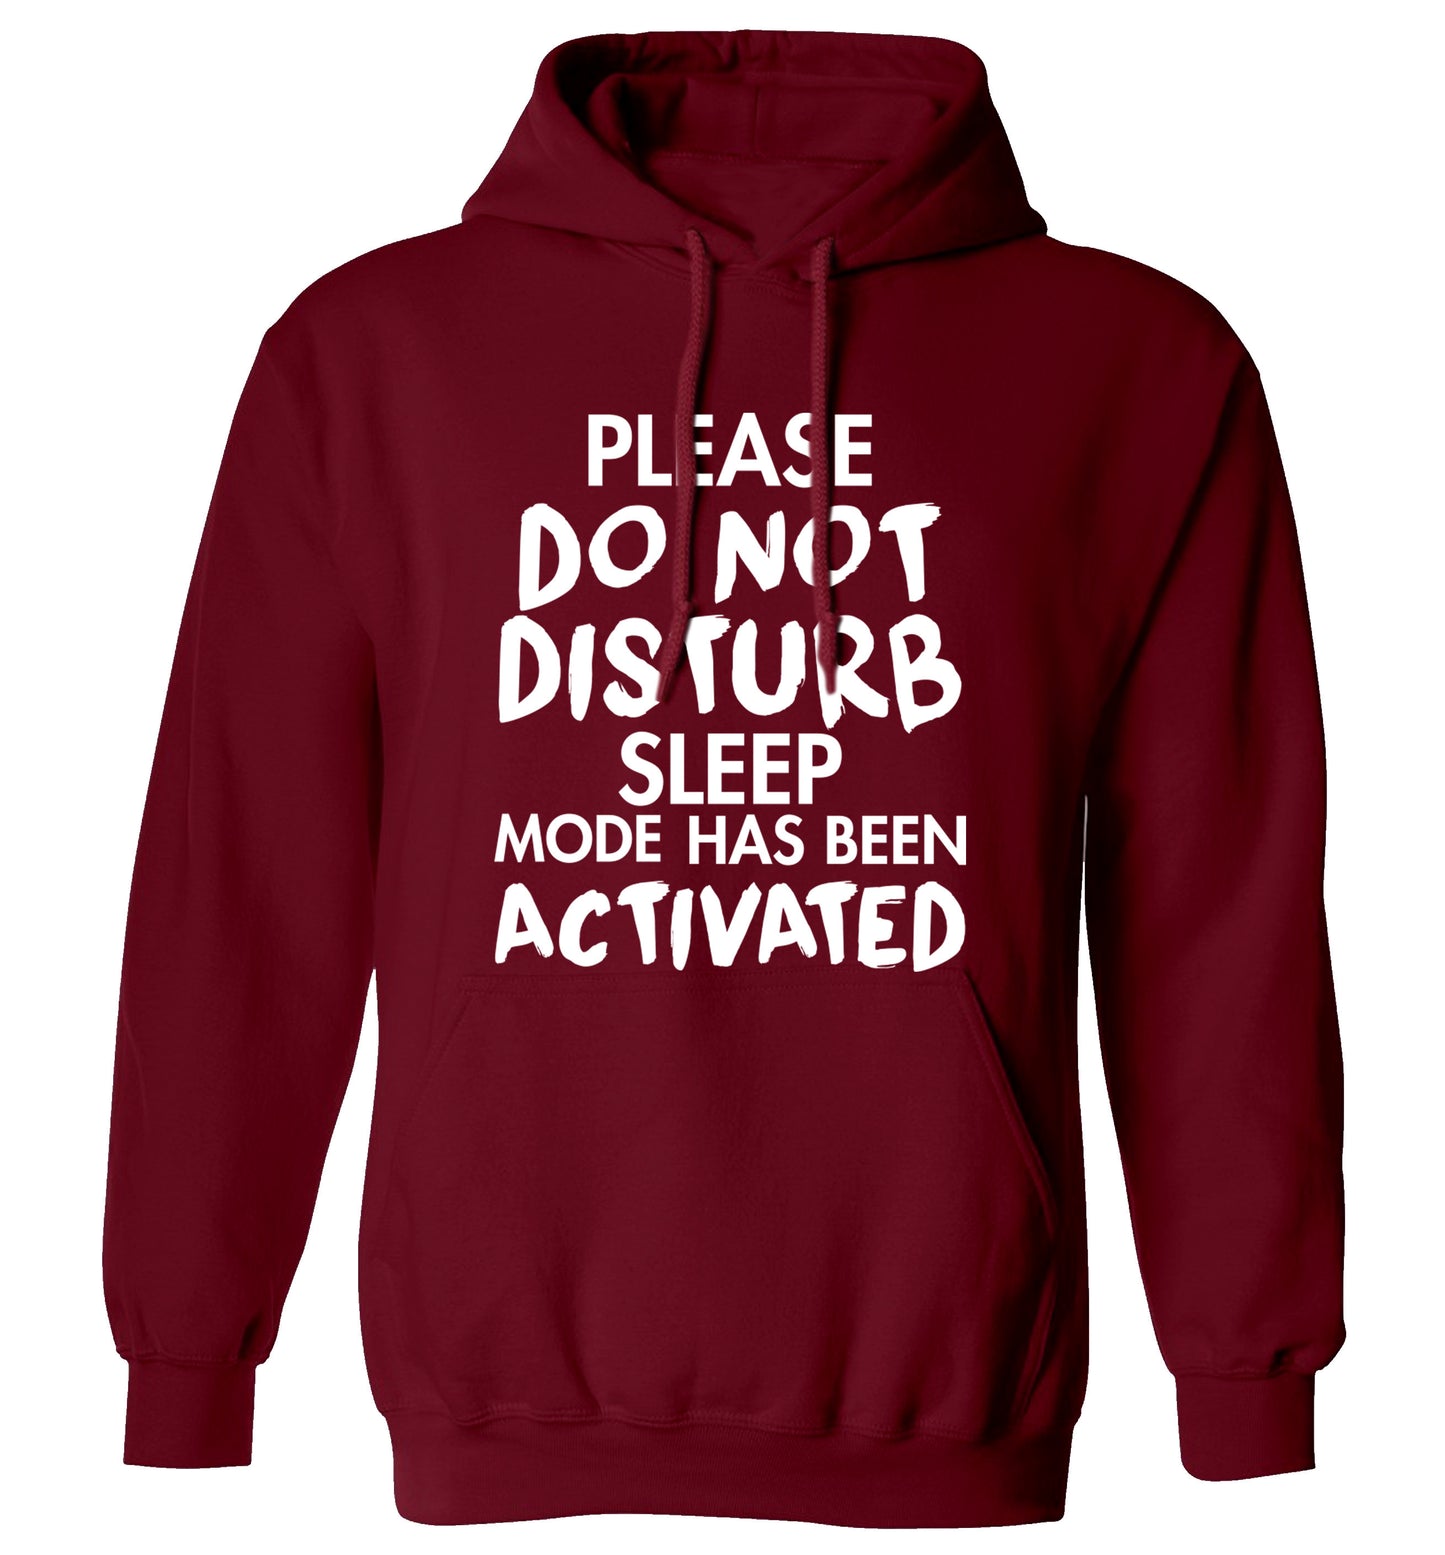 Please do not disturb sleeping mode has been activated adults unisex maroon hoodie 2XL